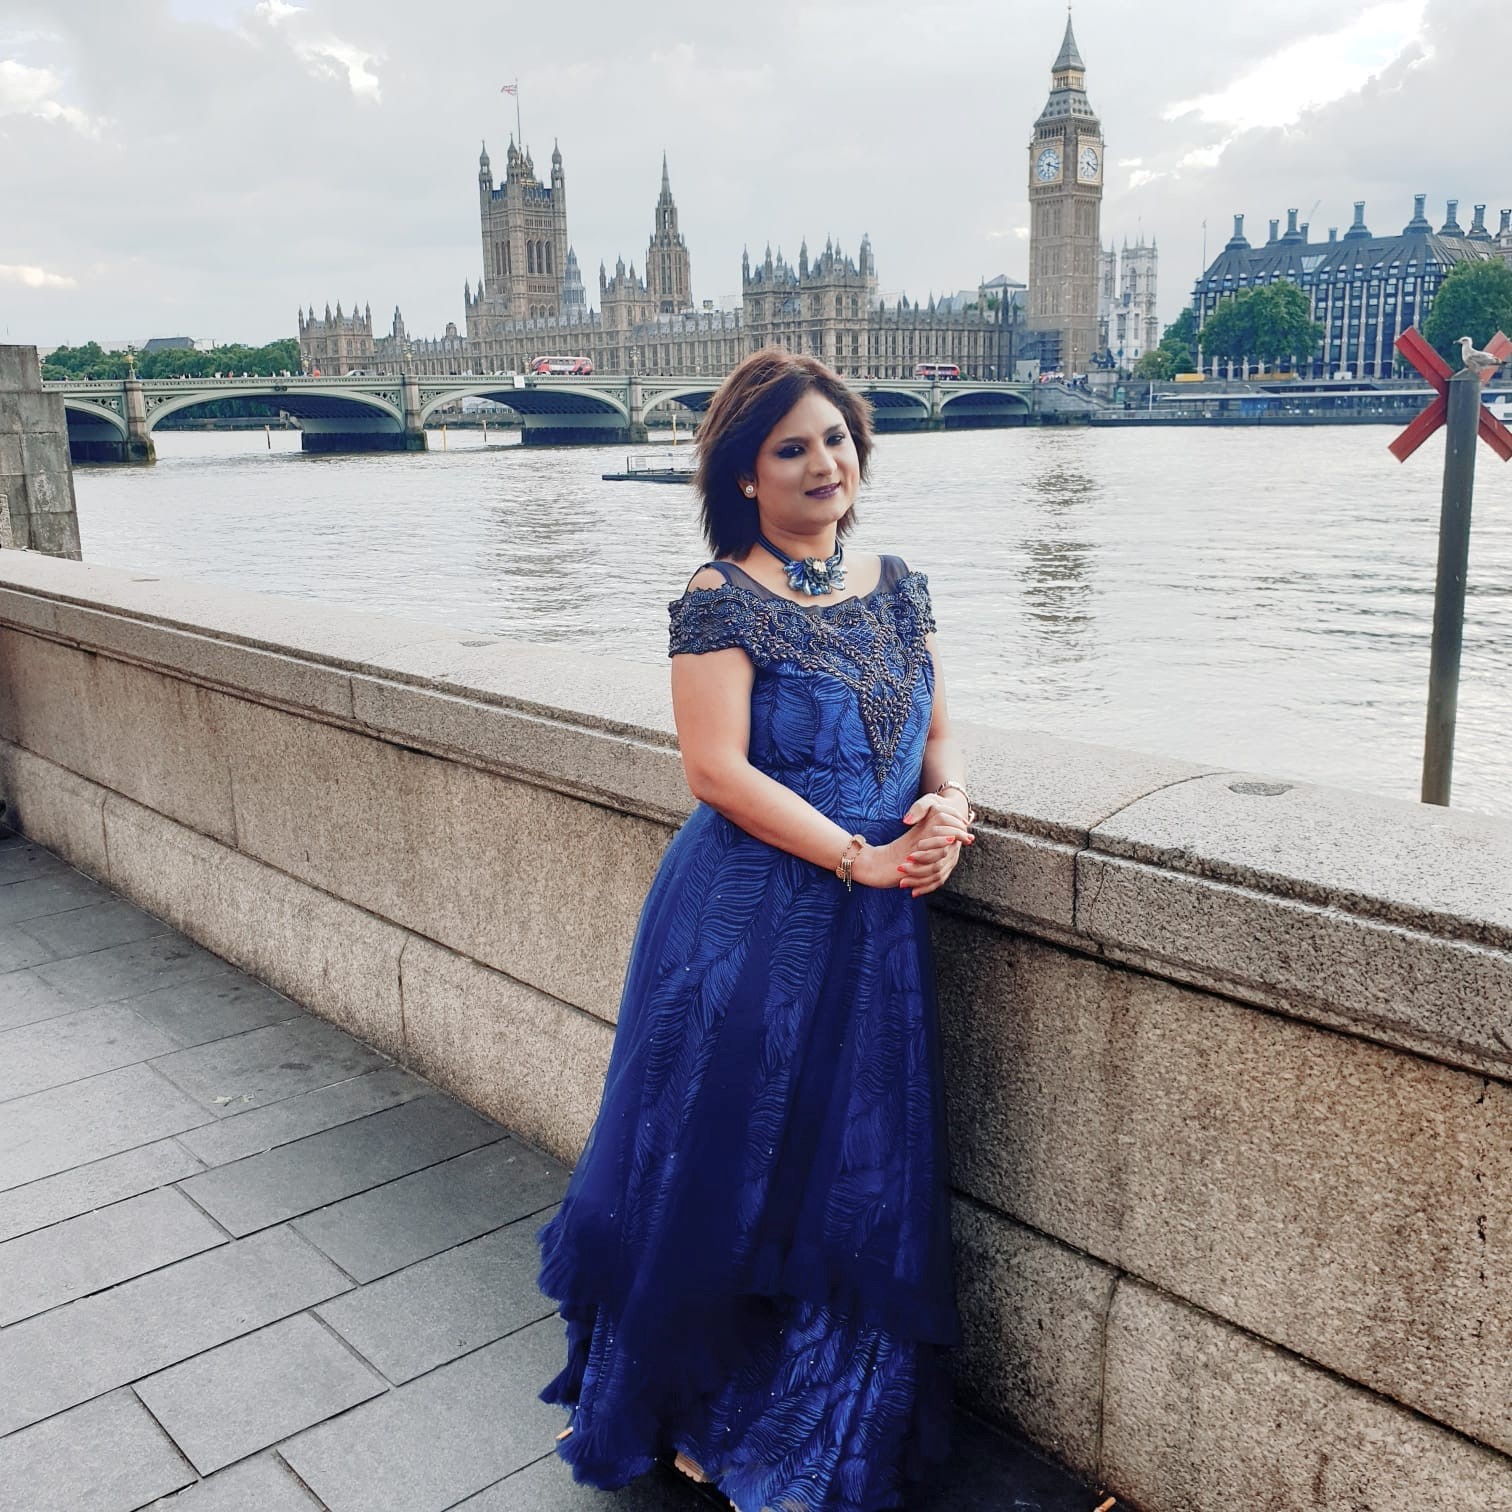 Glasgow woman wins Best Entrepreneur award at event held at Houses of Parliament